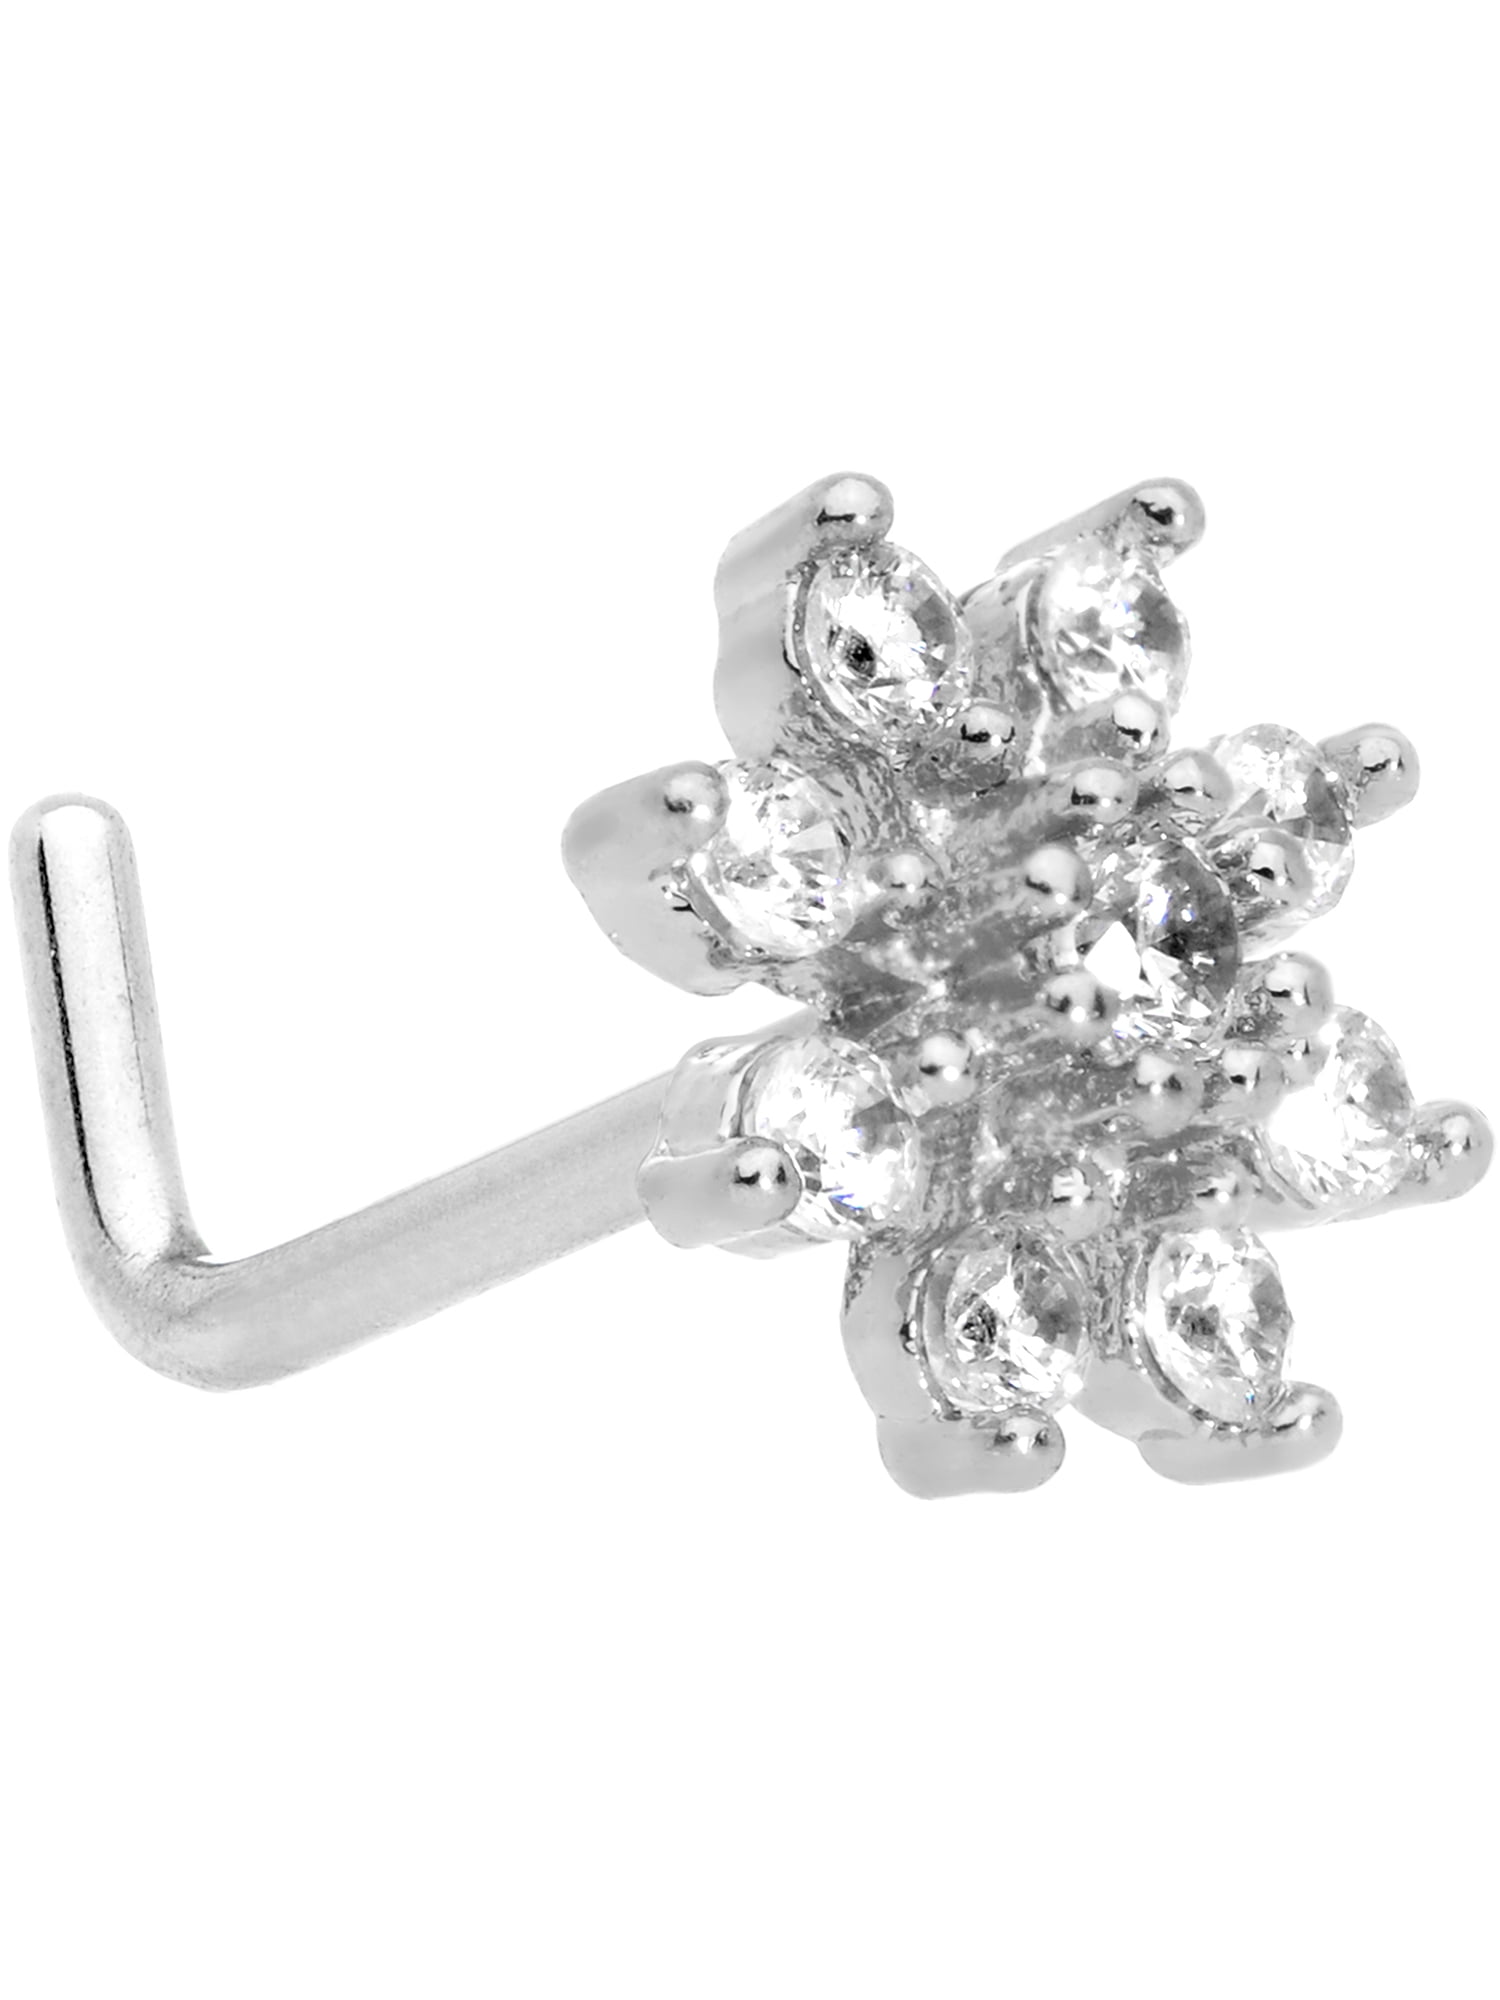 20 Nose Studs Clear Crystal Flower Nose Bars Studs Rings Box Included YG